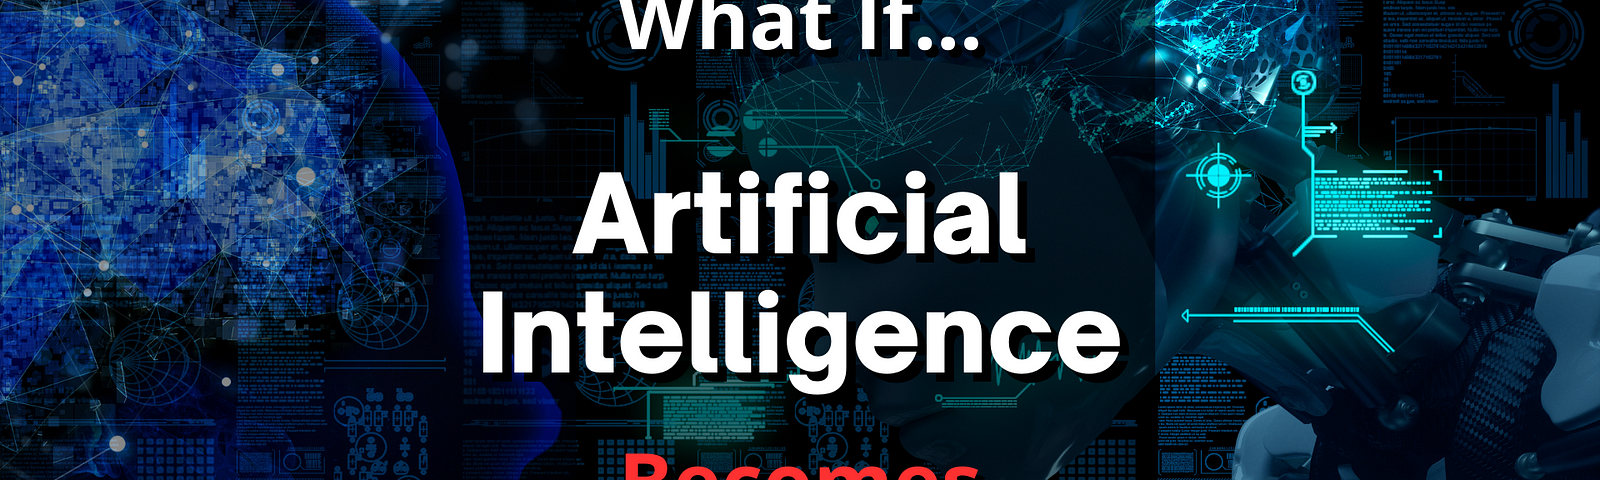 what if artificial intelligence or AI become digitally self aware